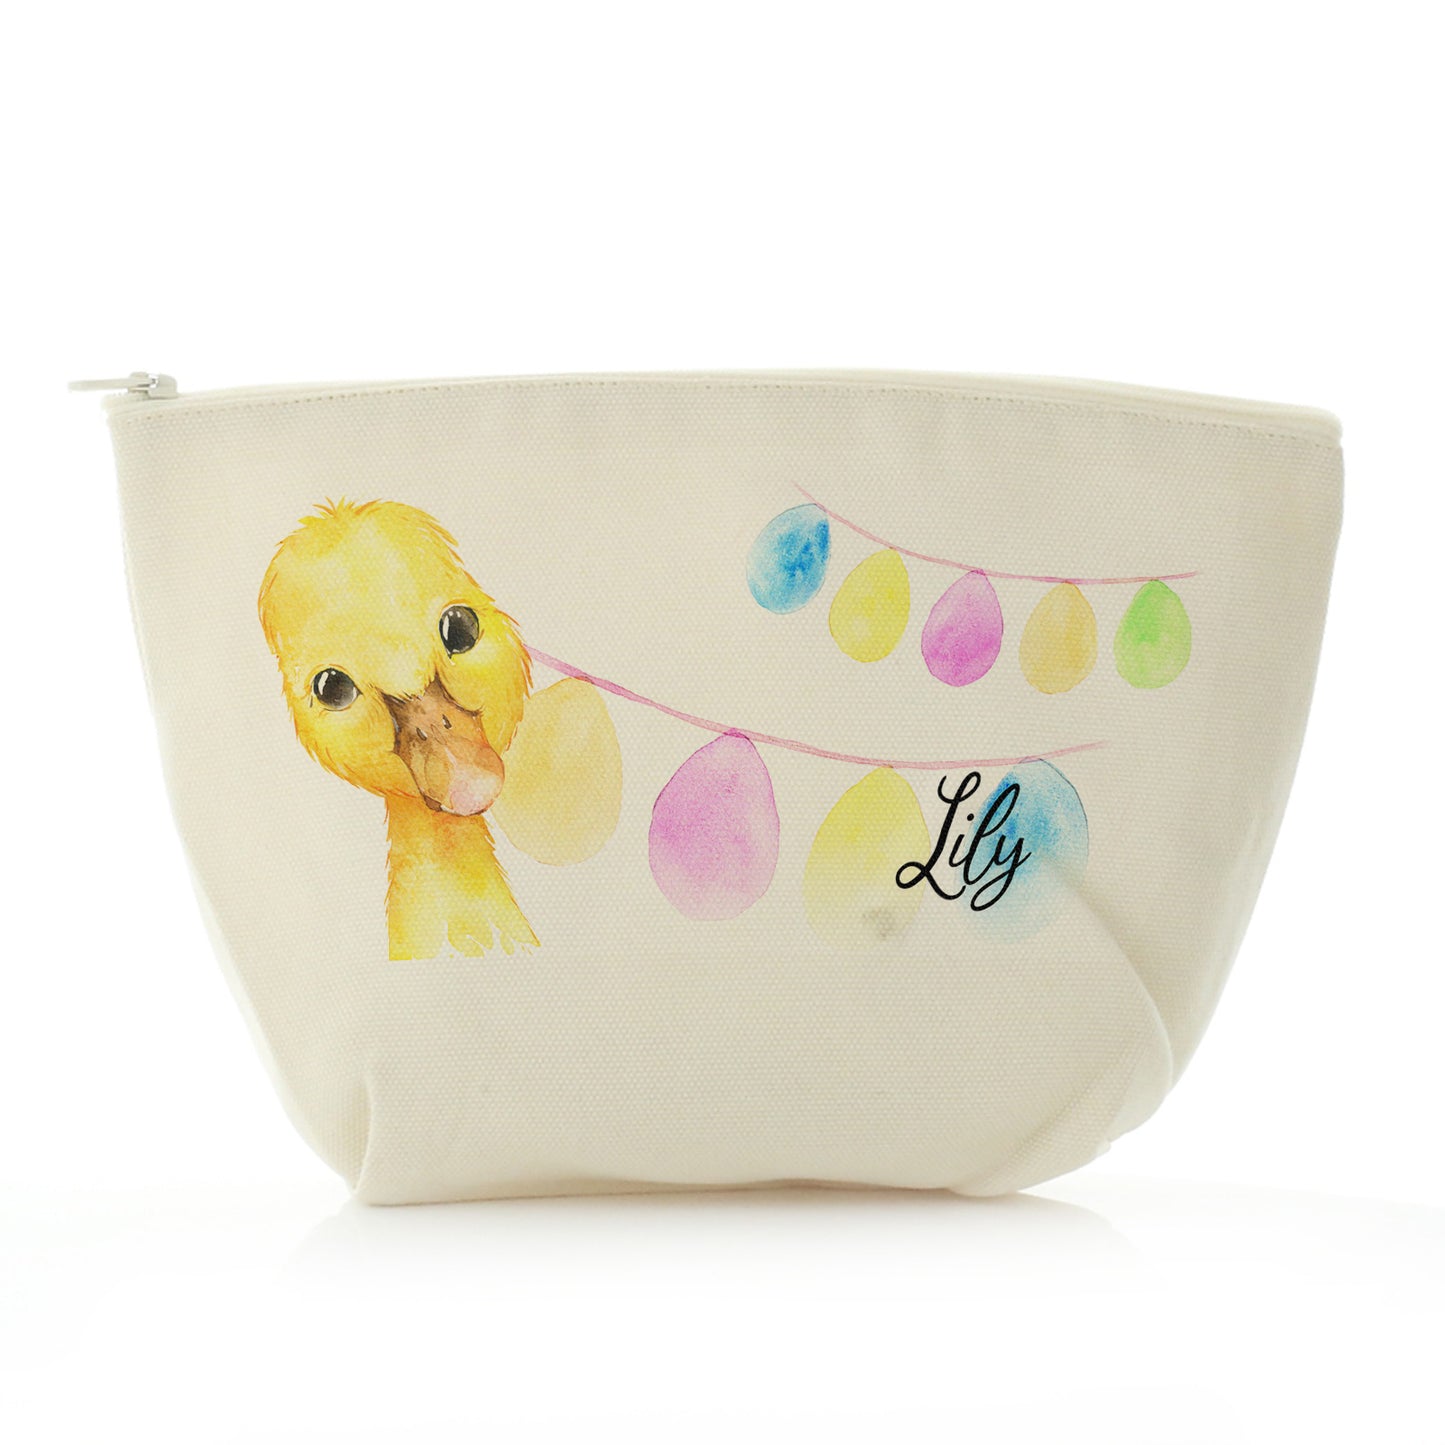 Personalised Canvas Zip Bag with Yellow Duck Multicolour Buntin and Cute Text